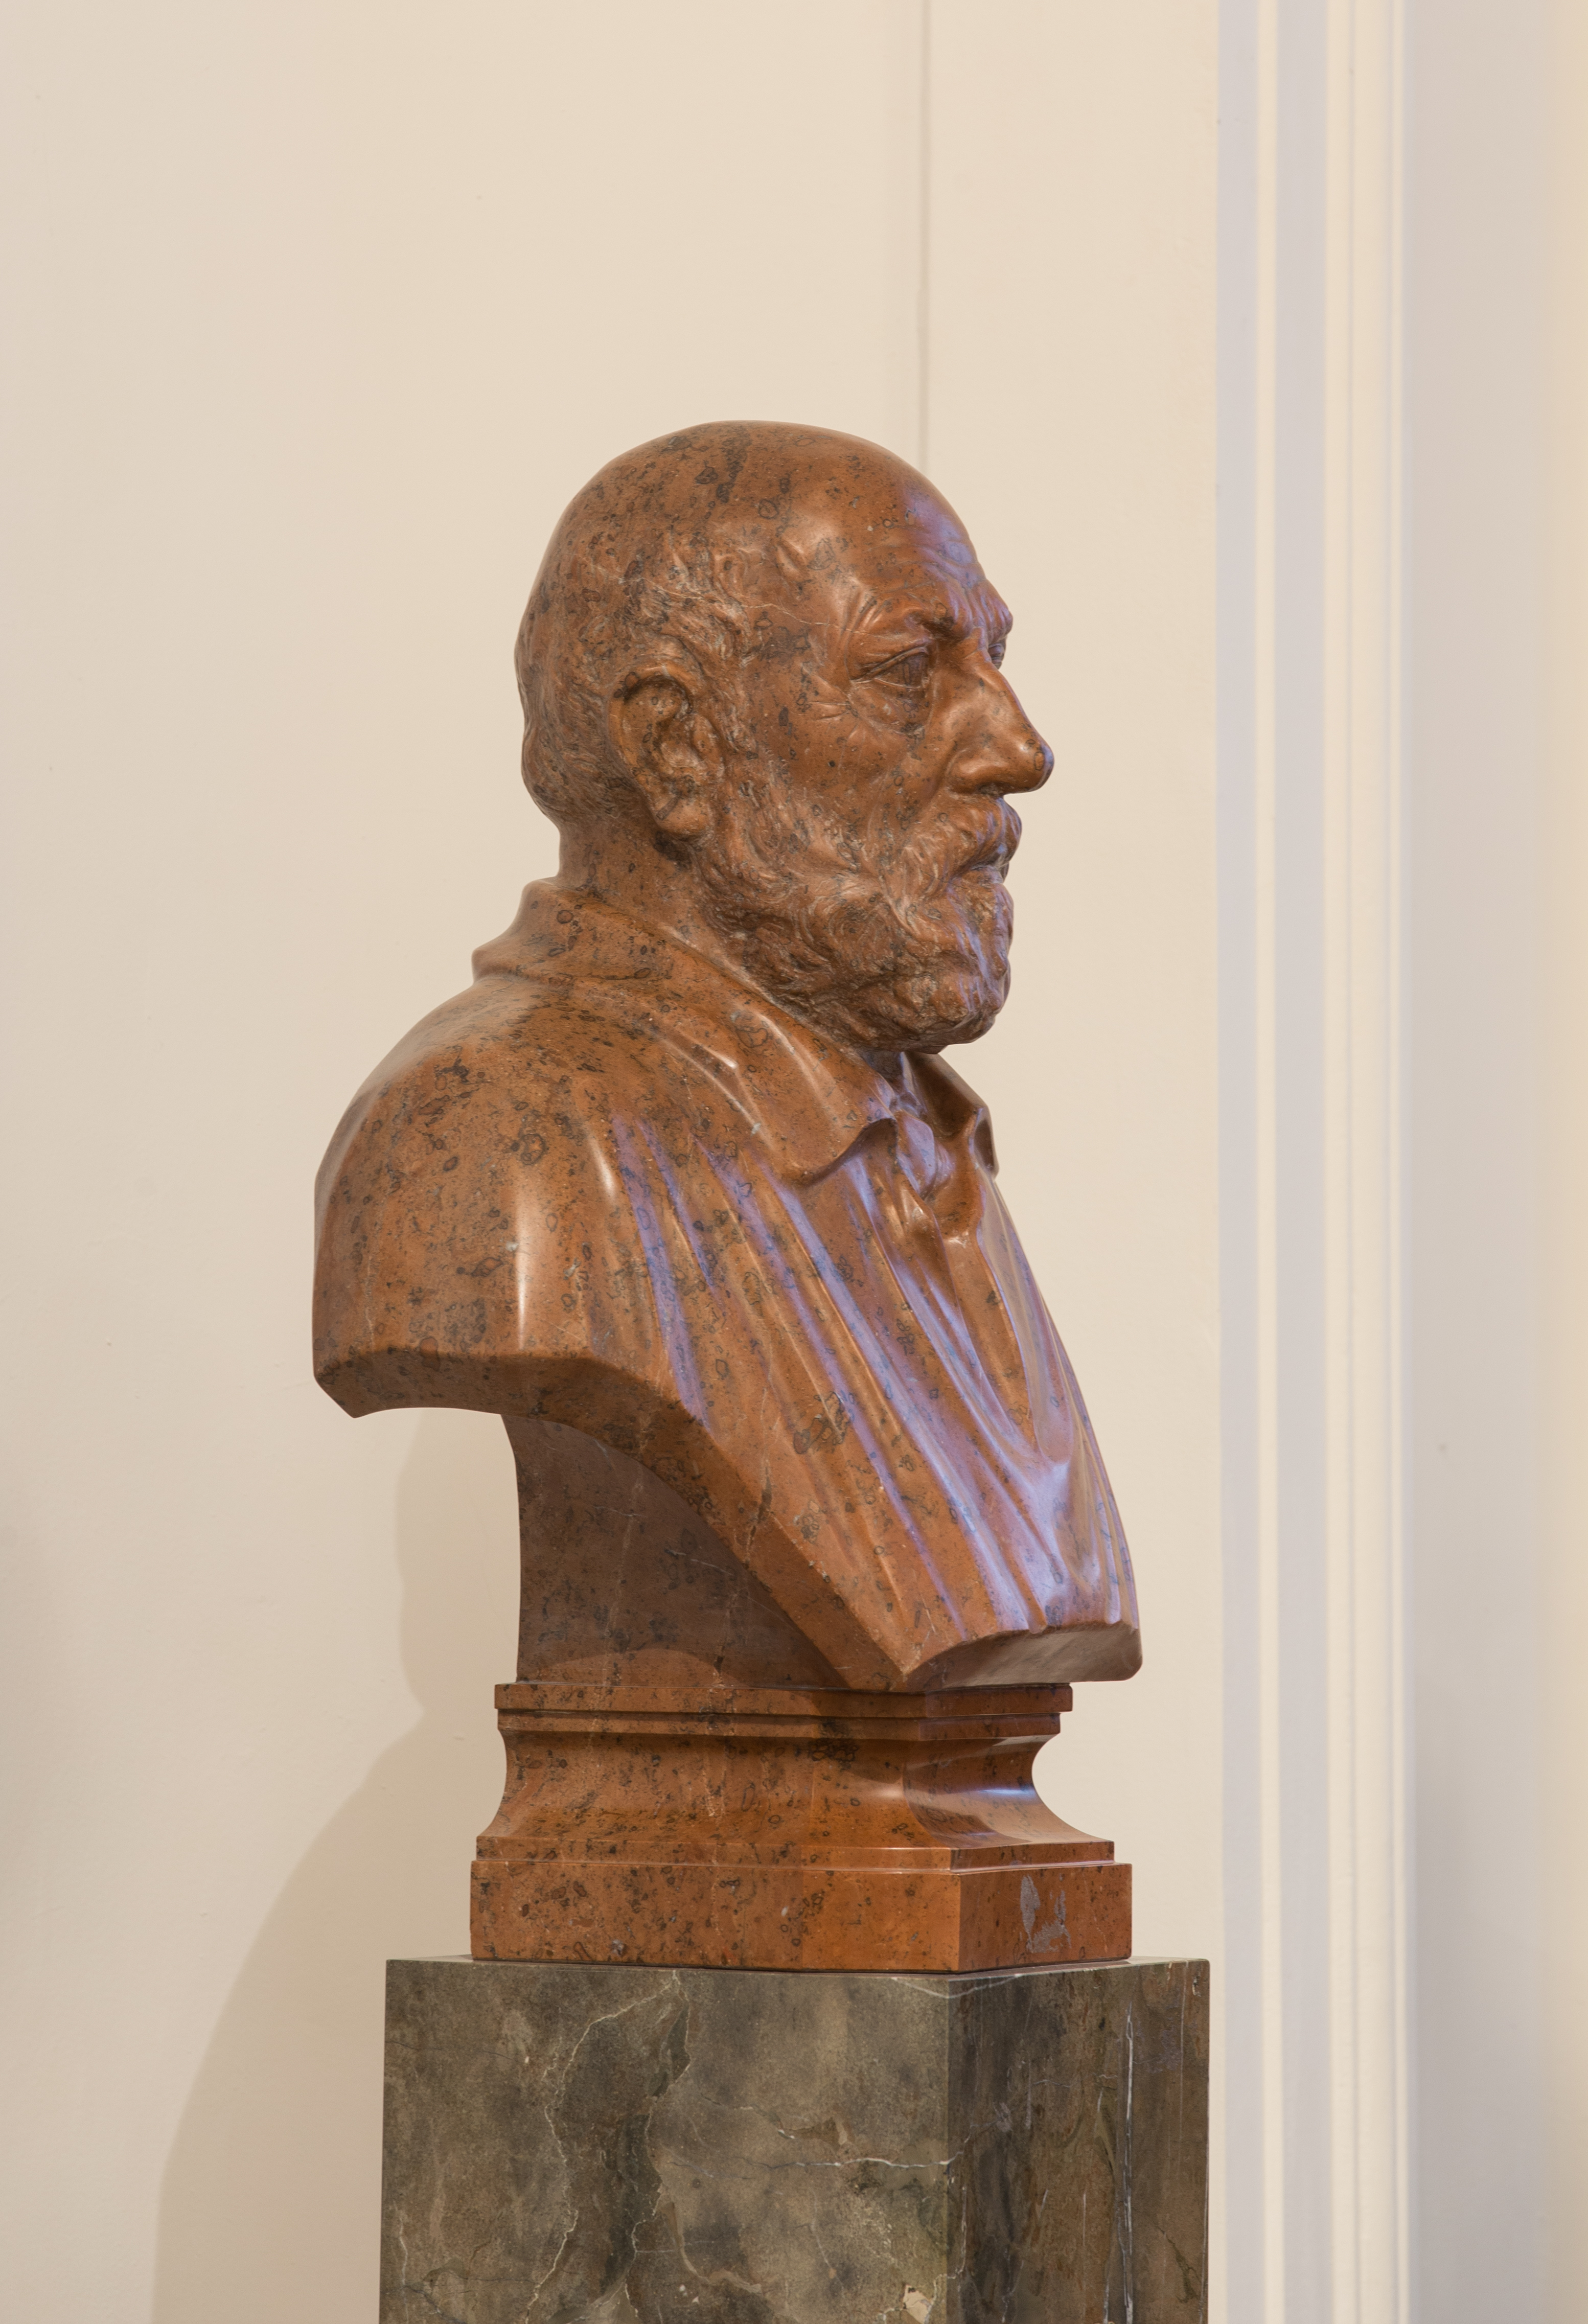 Eduard Suess - Bust in the Aula of the Academy of Sciences, Vienna - hu -8512